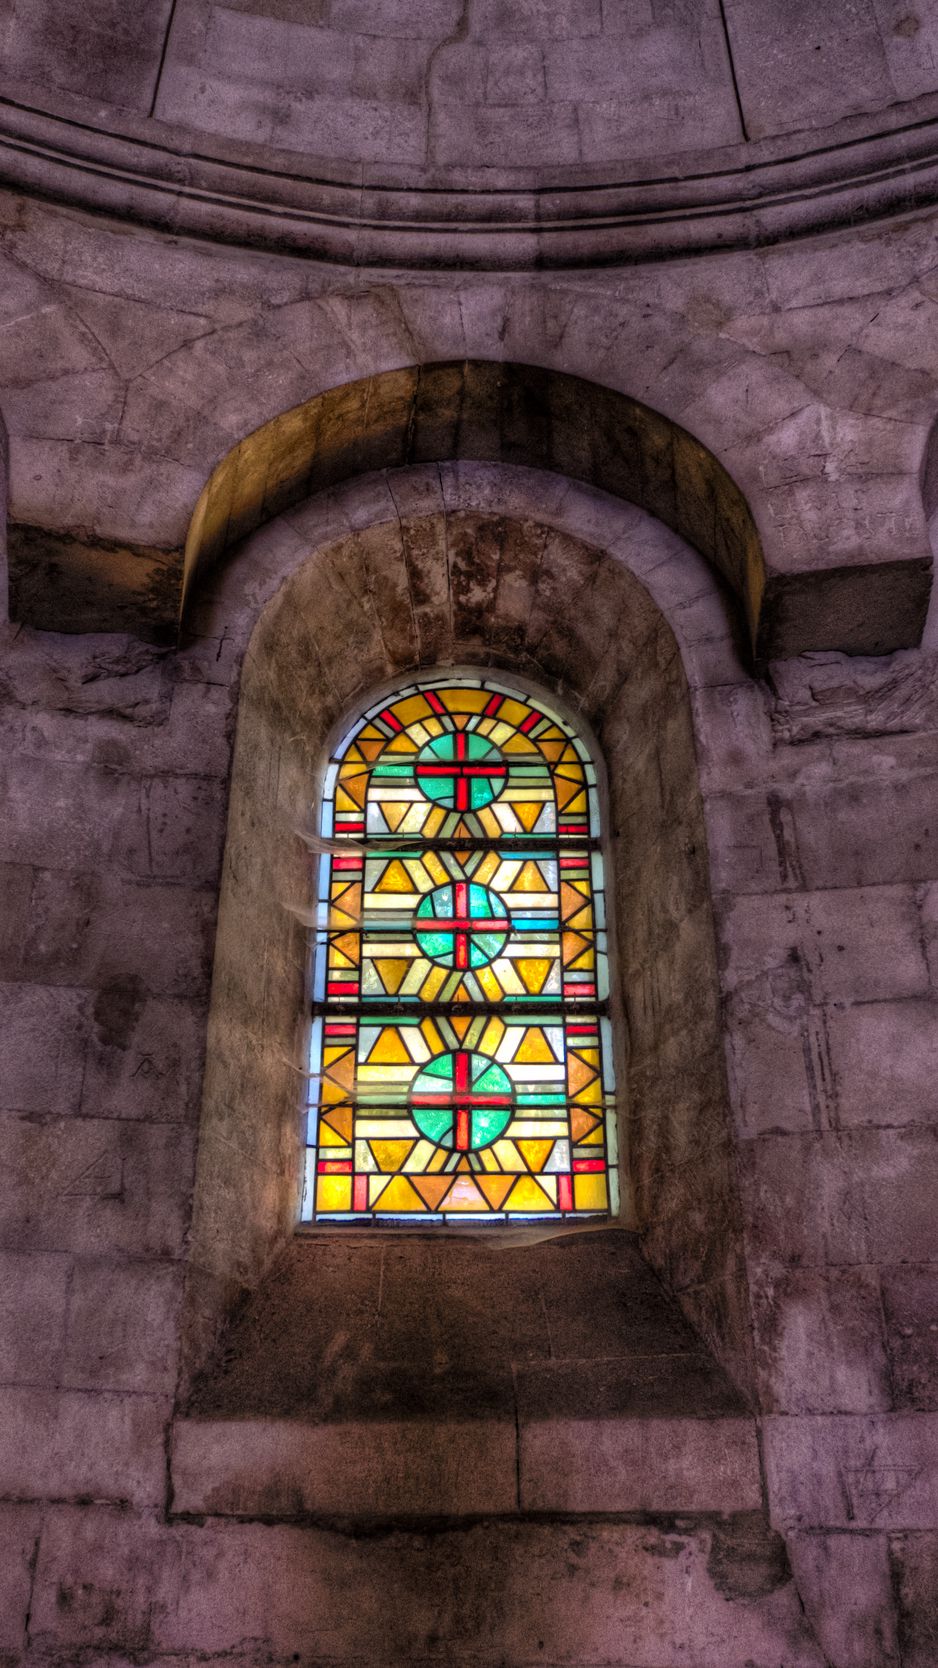 Download wallpaper 938x1668 window, stained glass window, architecture  iphone 8/7/6s/6 for parallax hd background